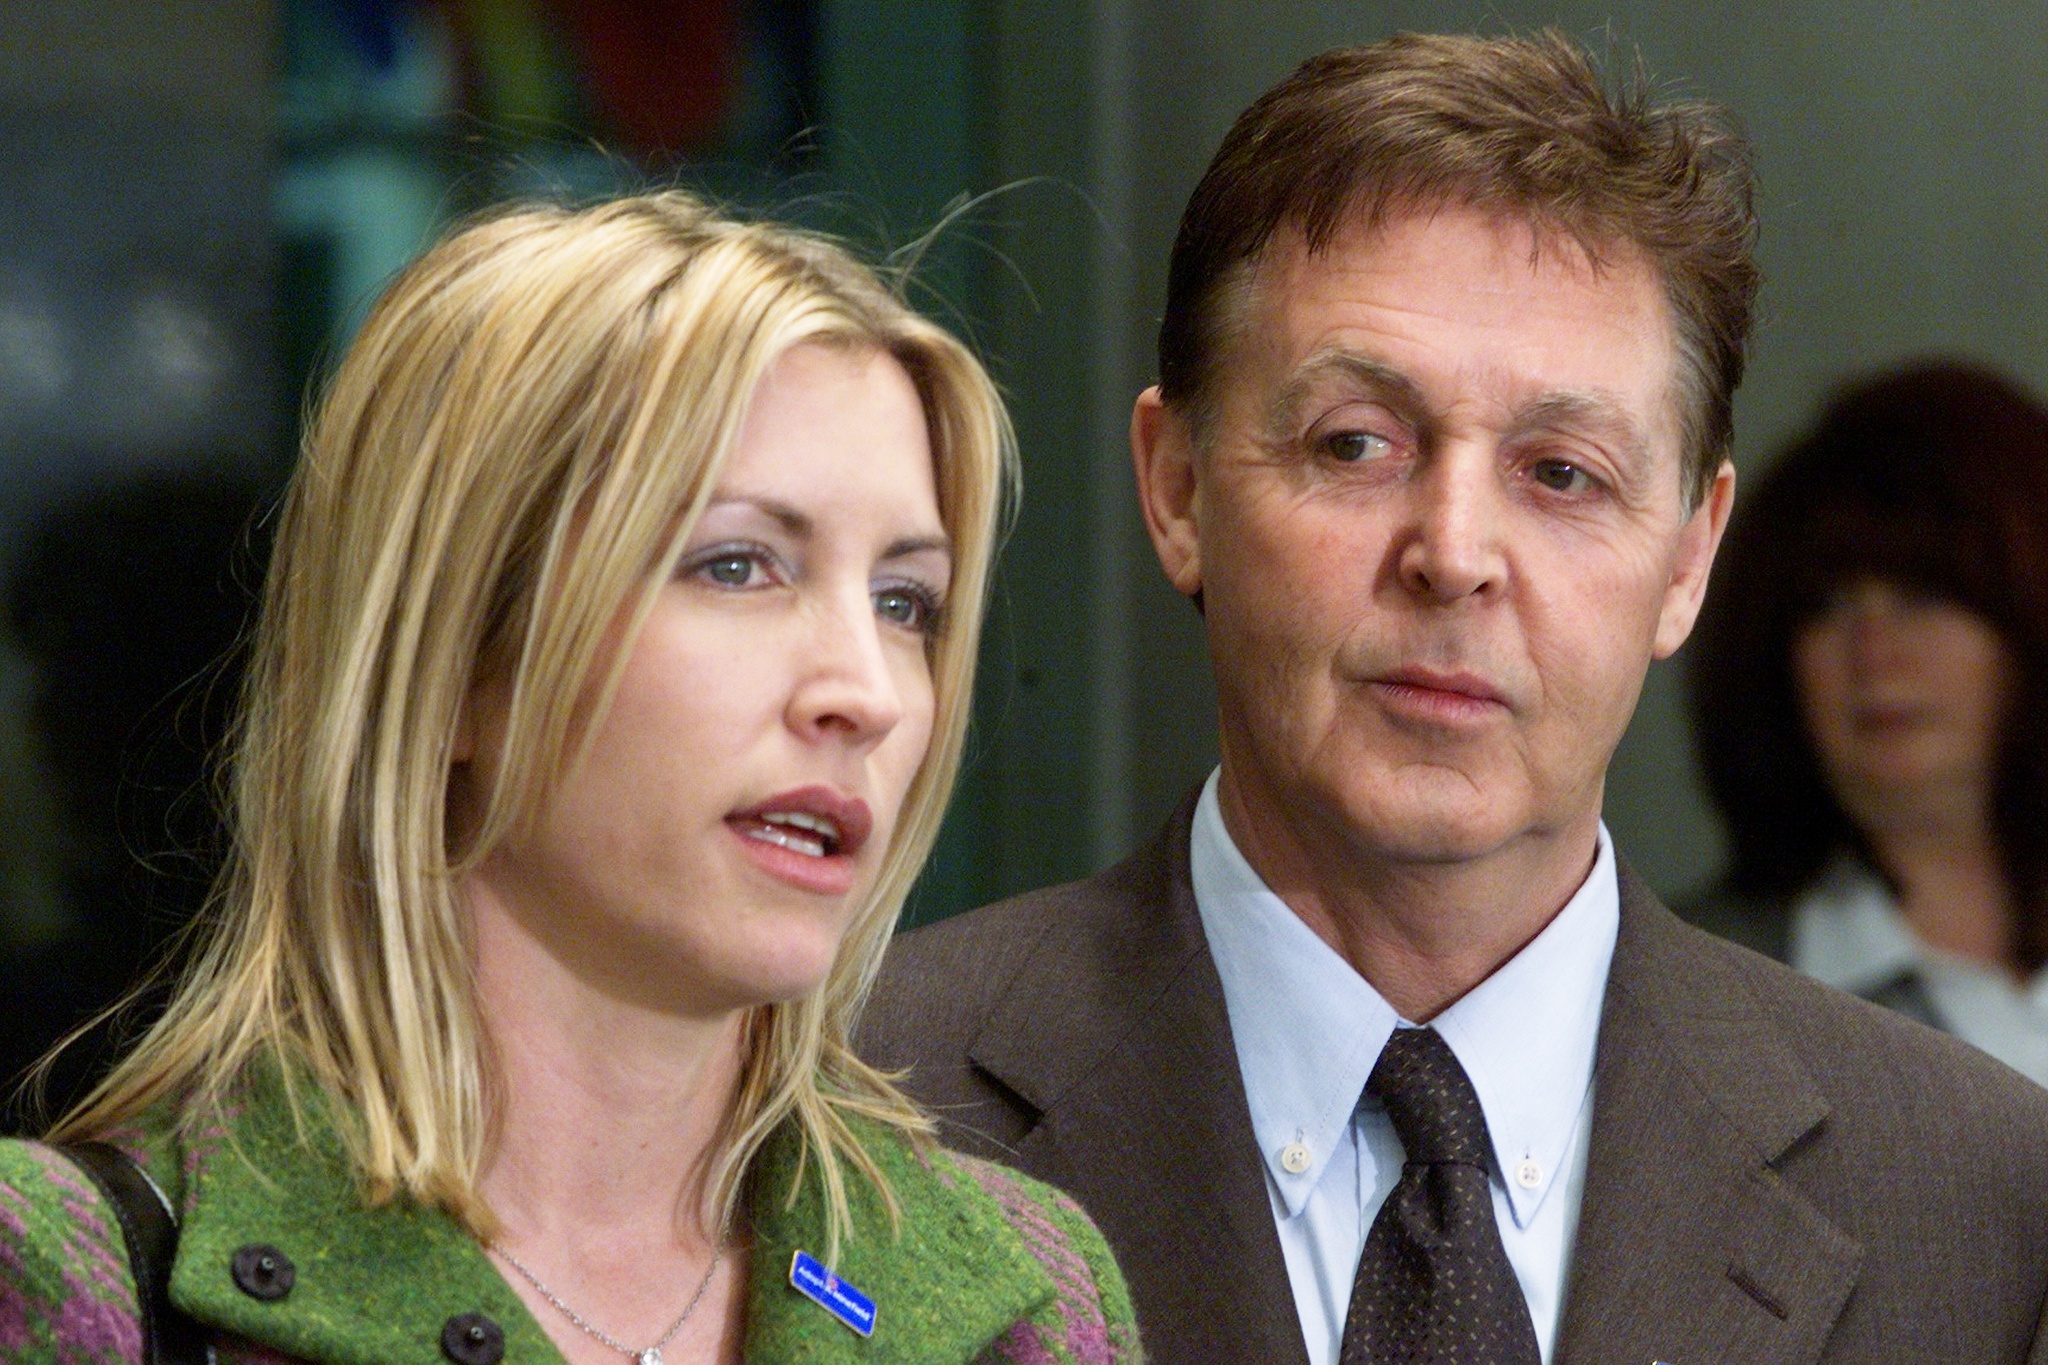 Paul McCartney and Heather Mills in the United States 2000 | Source: Getty Images